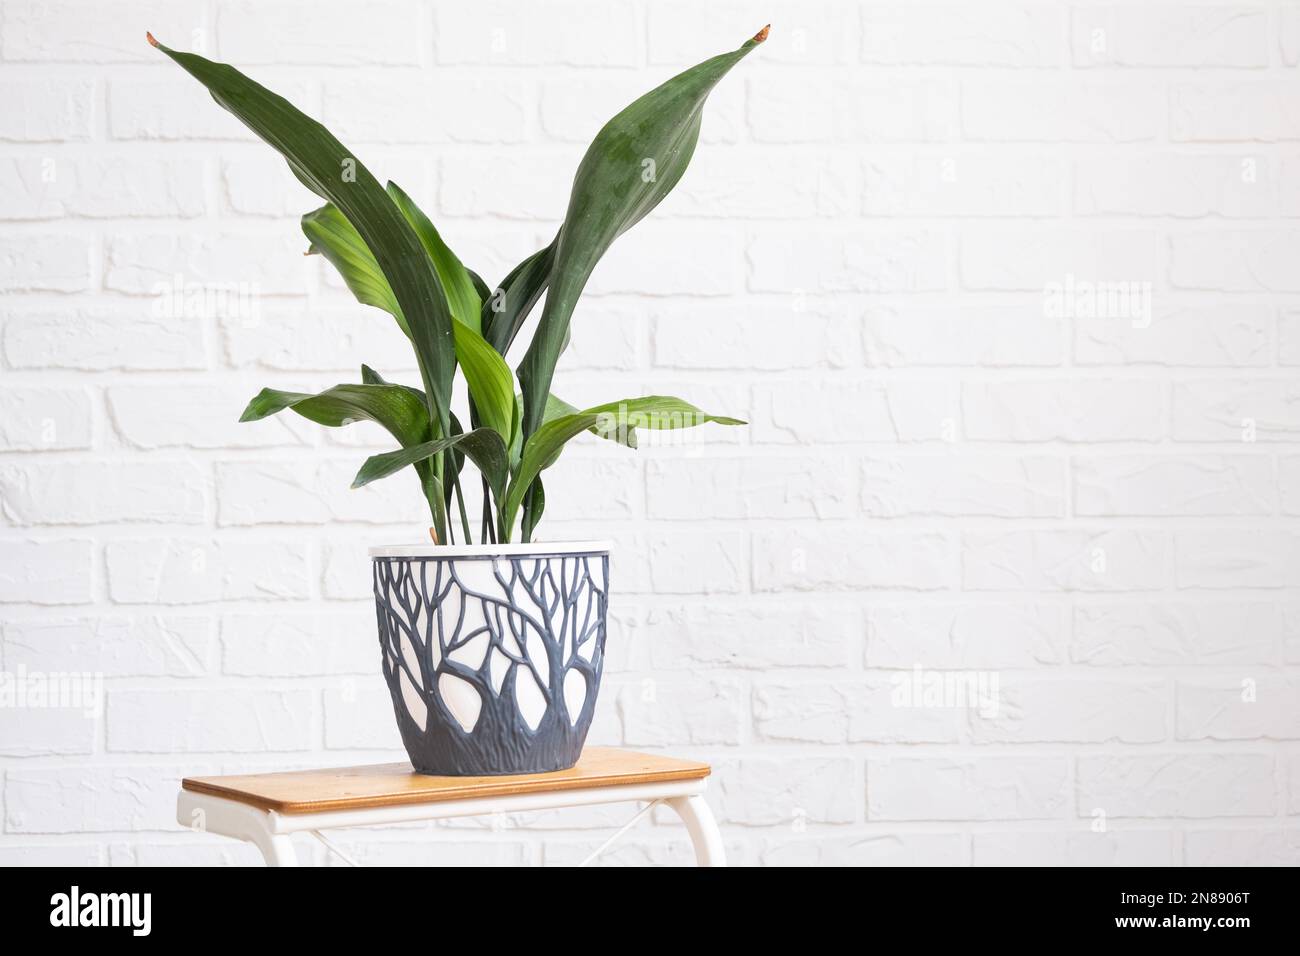 Aspidistra with tough leaves on a stand in interior on whtite brick wall. Potted house plants, green home decor, care and cultivation Stock Photo